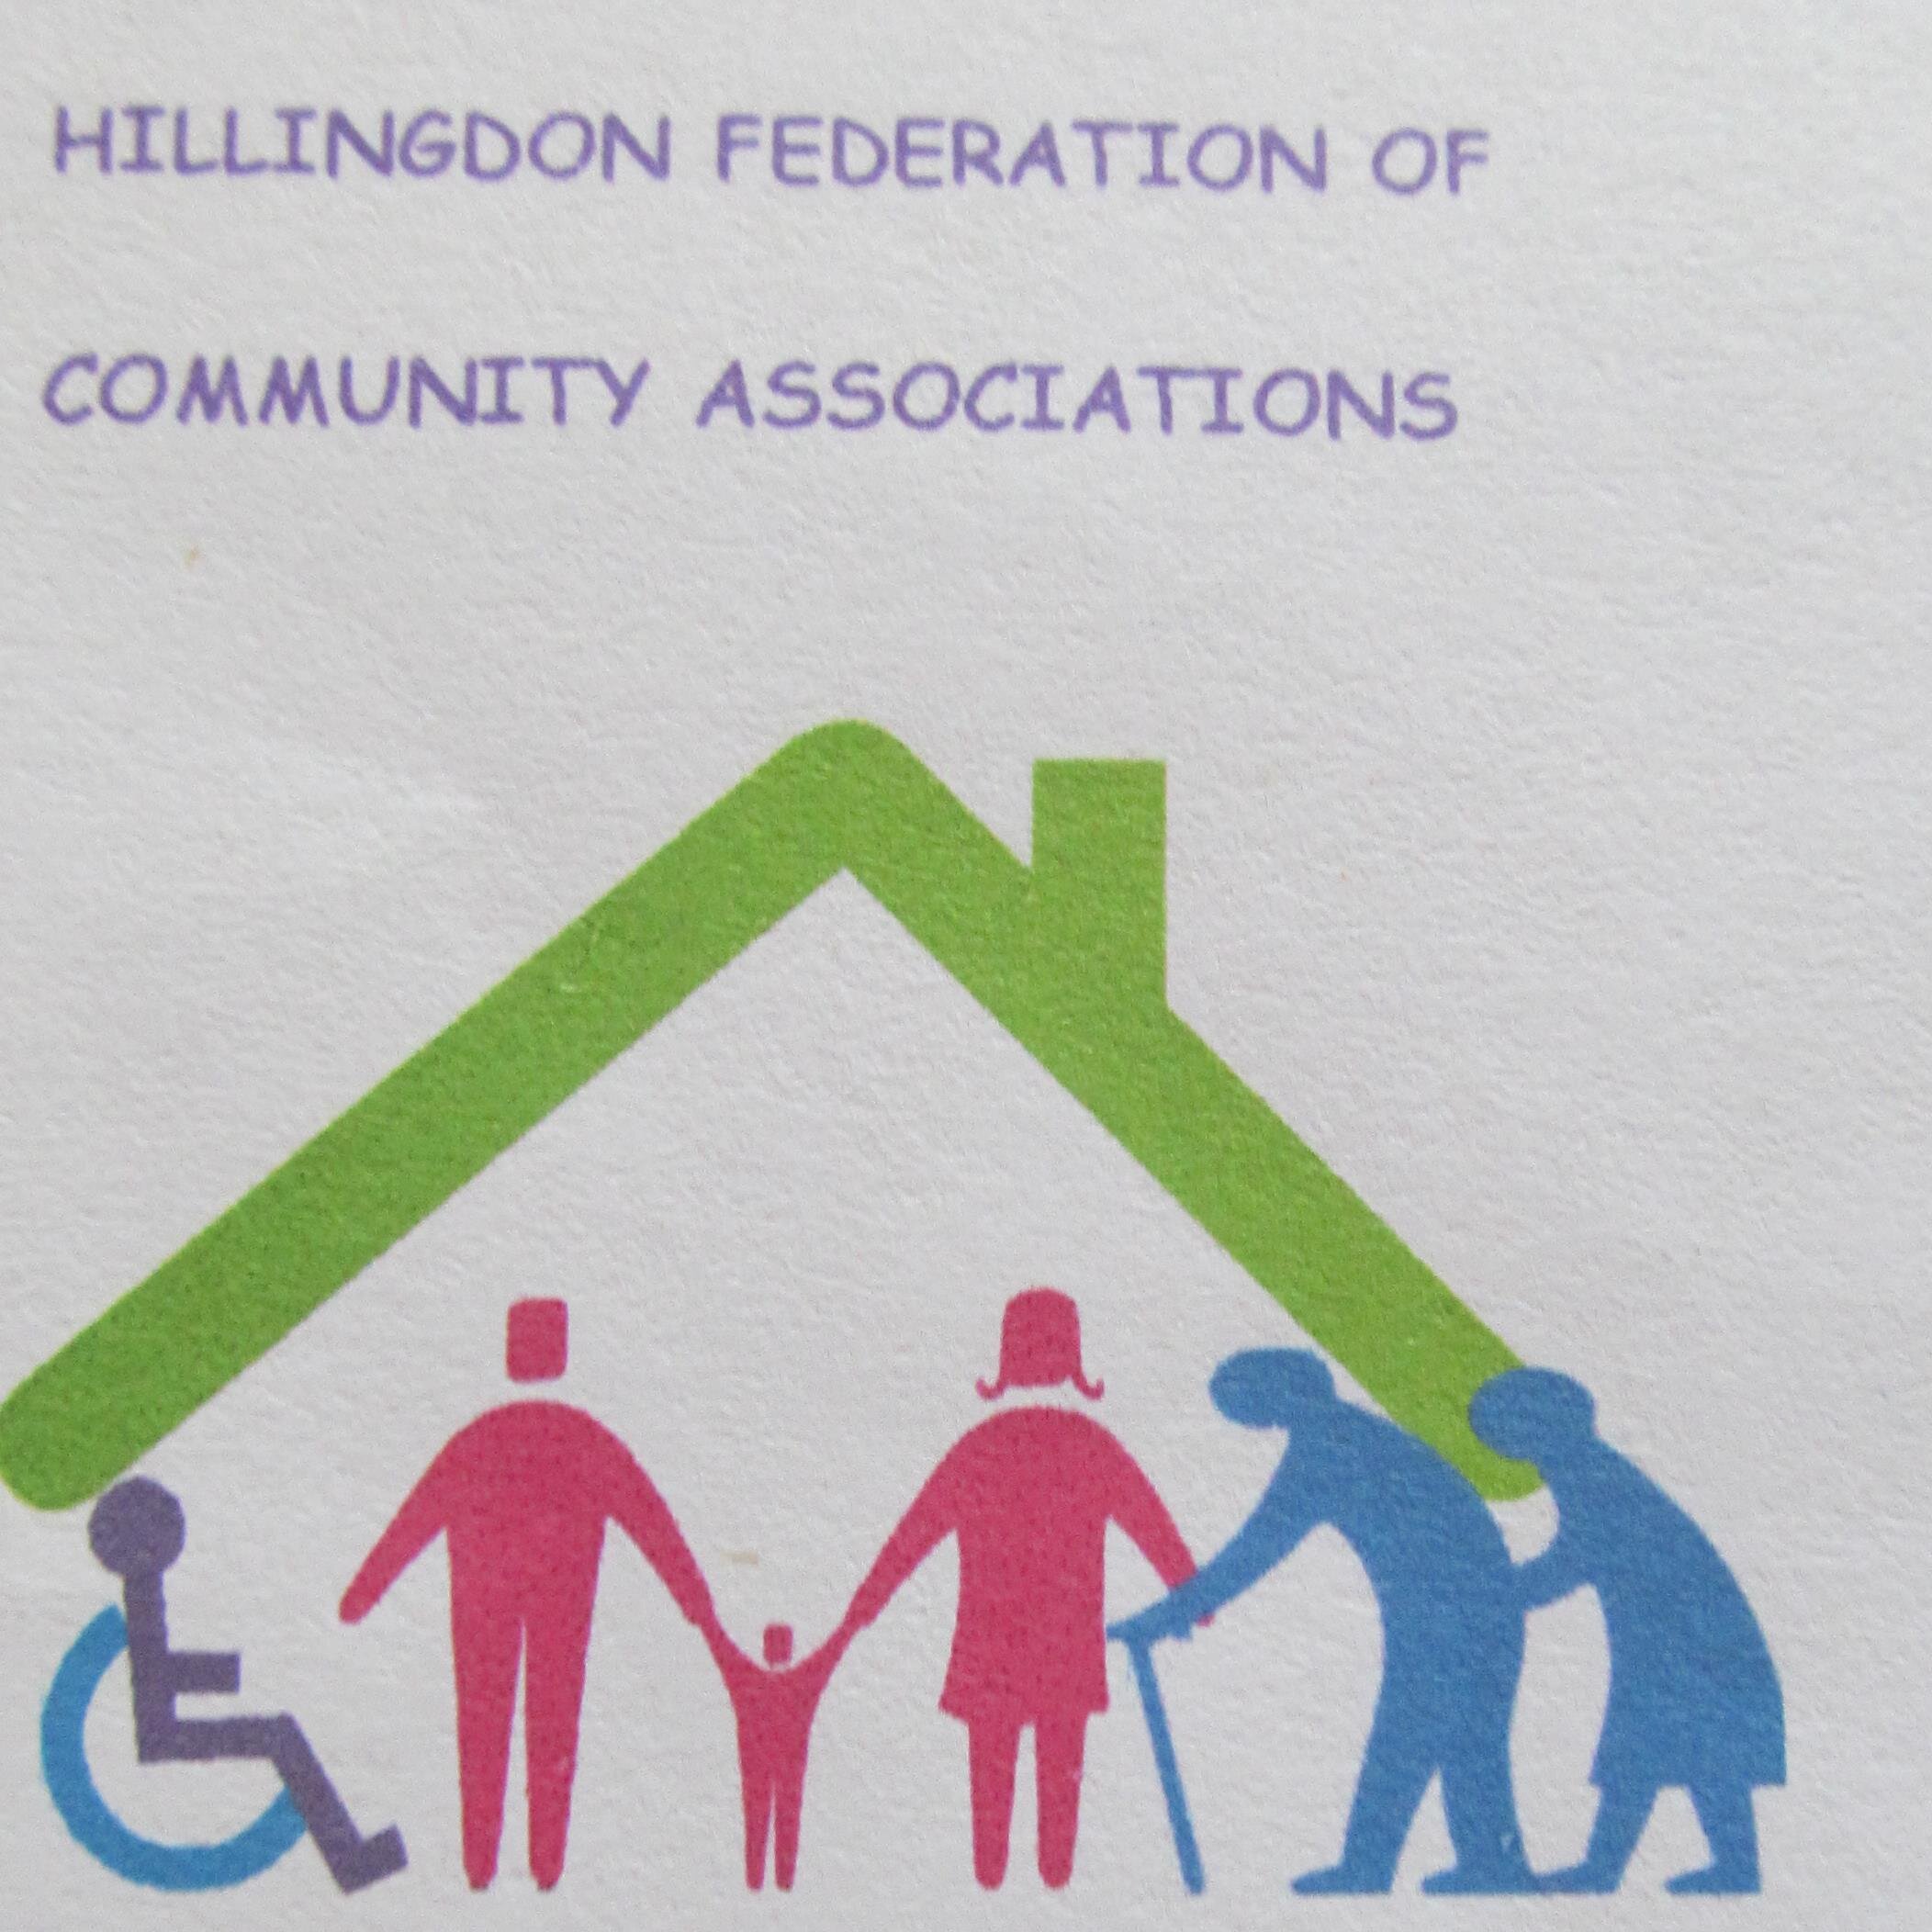 Umbrella voluntary organisation representing the community sector. We have 18 member community associations affiliated to HFCA